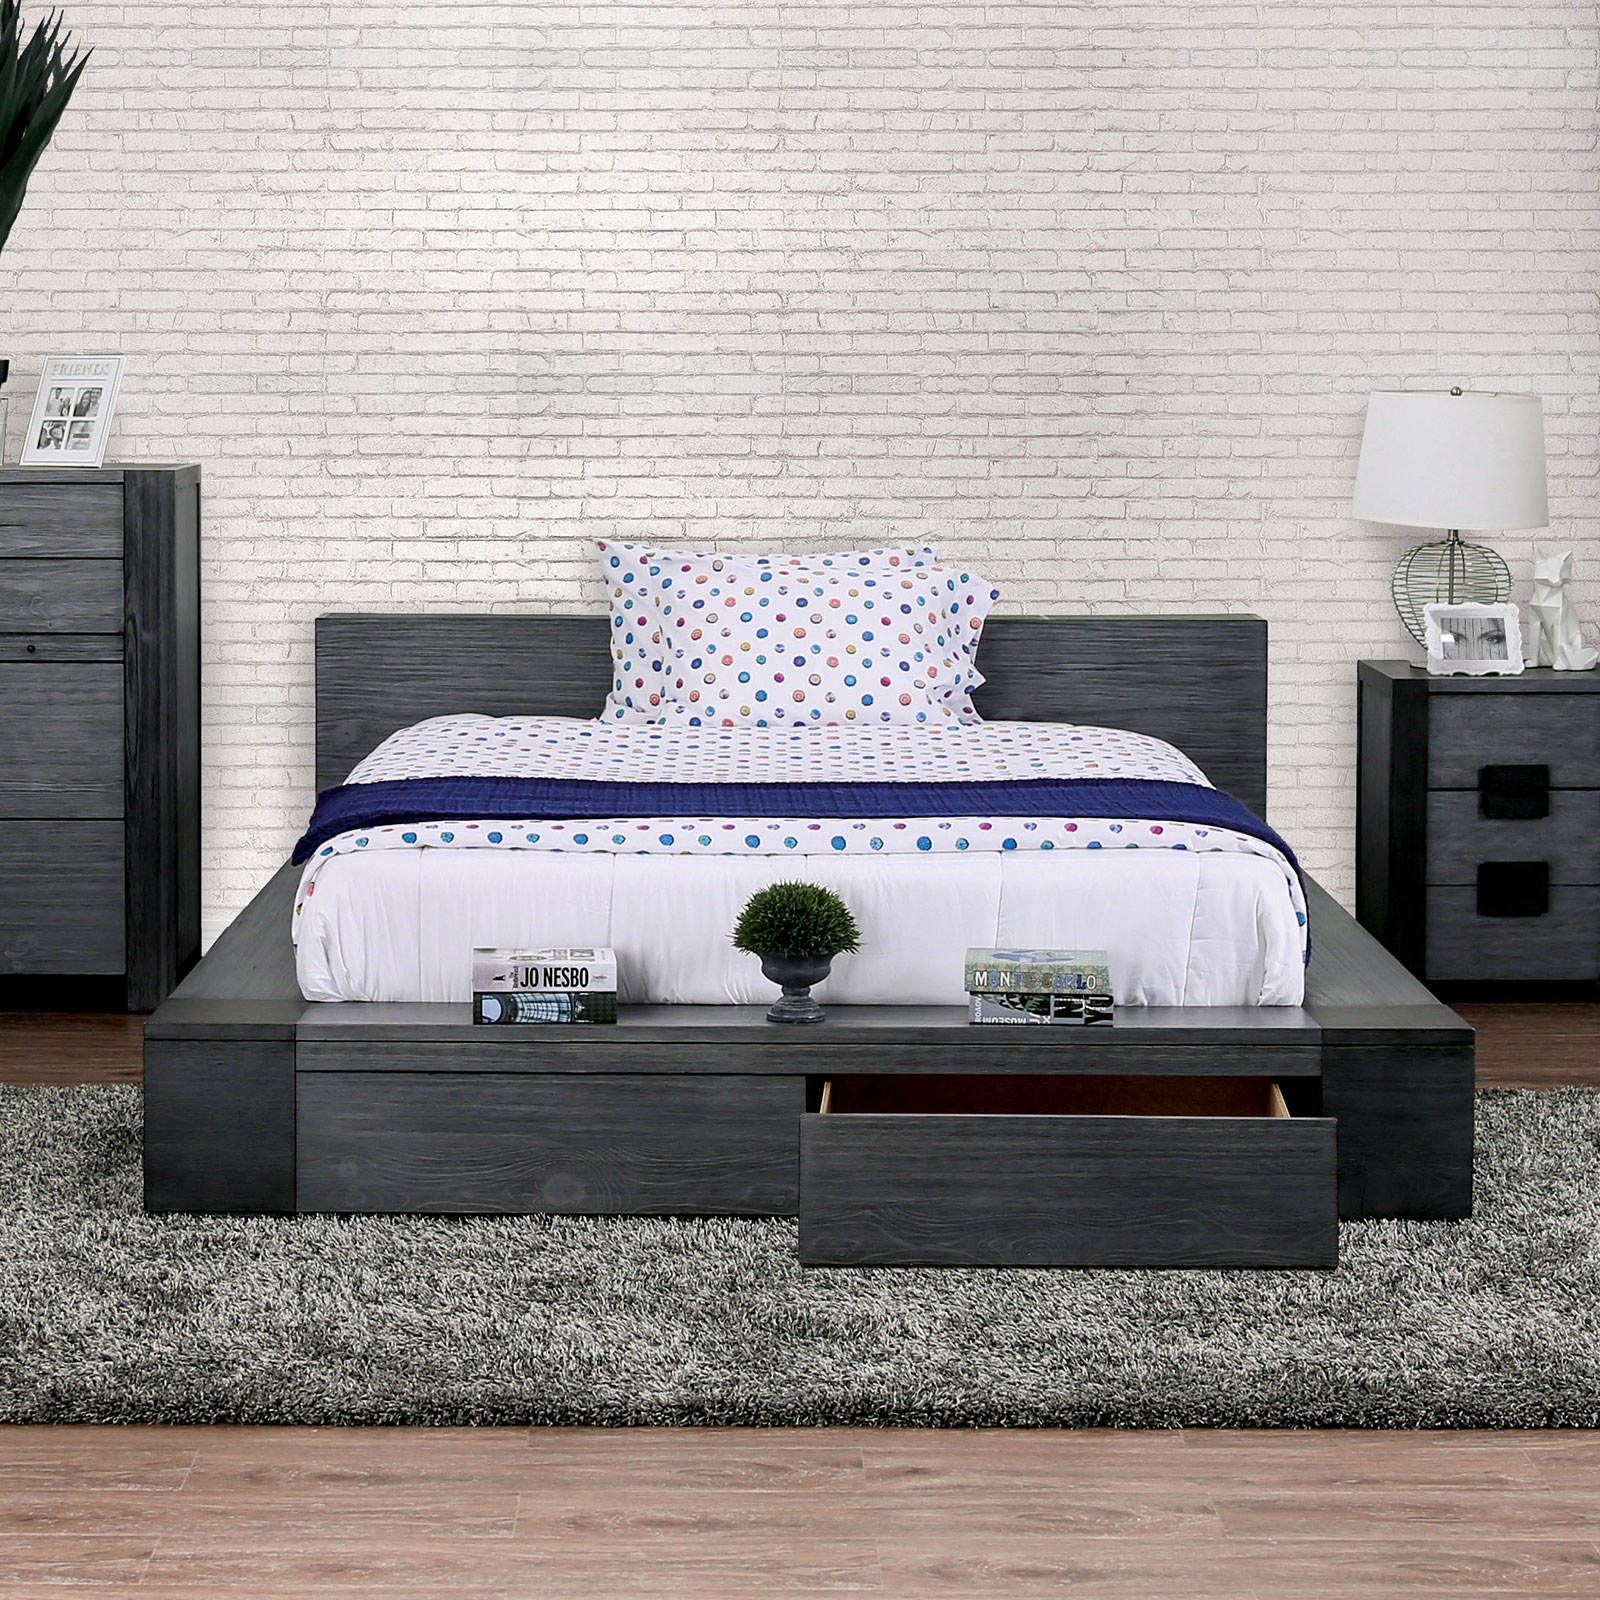 Esofa California King Size Bed, California King Size Bed Frame With Storage